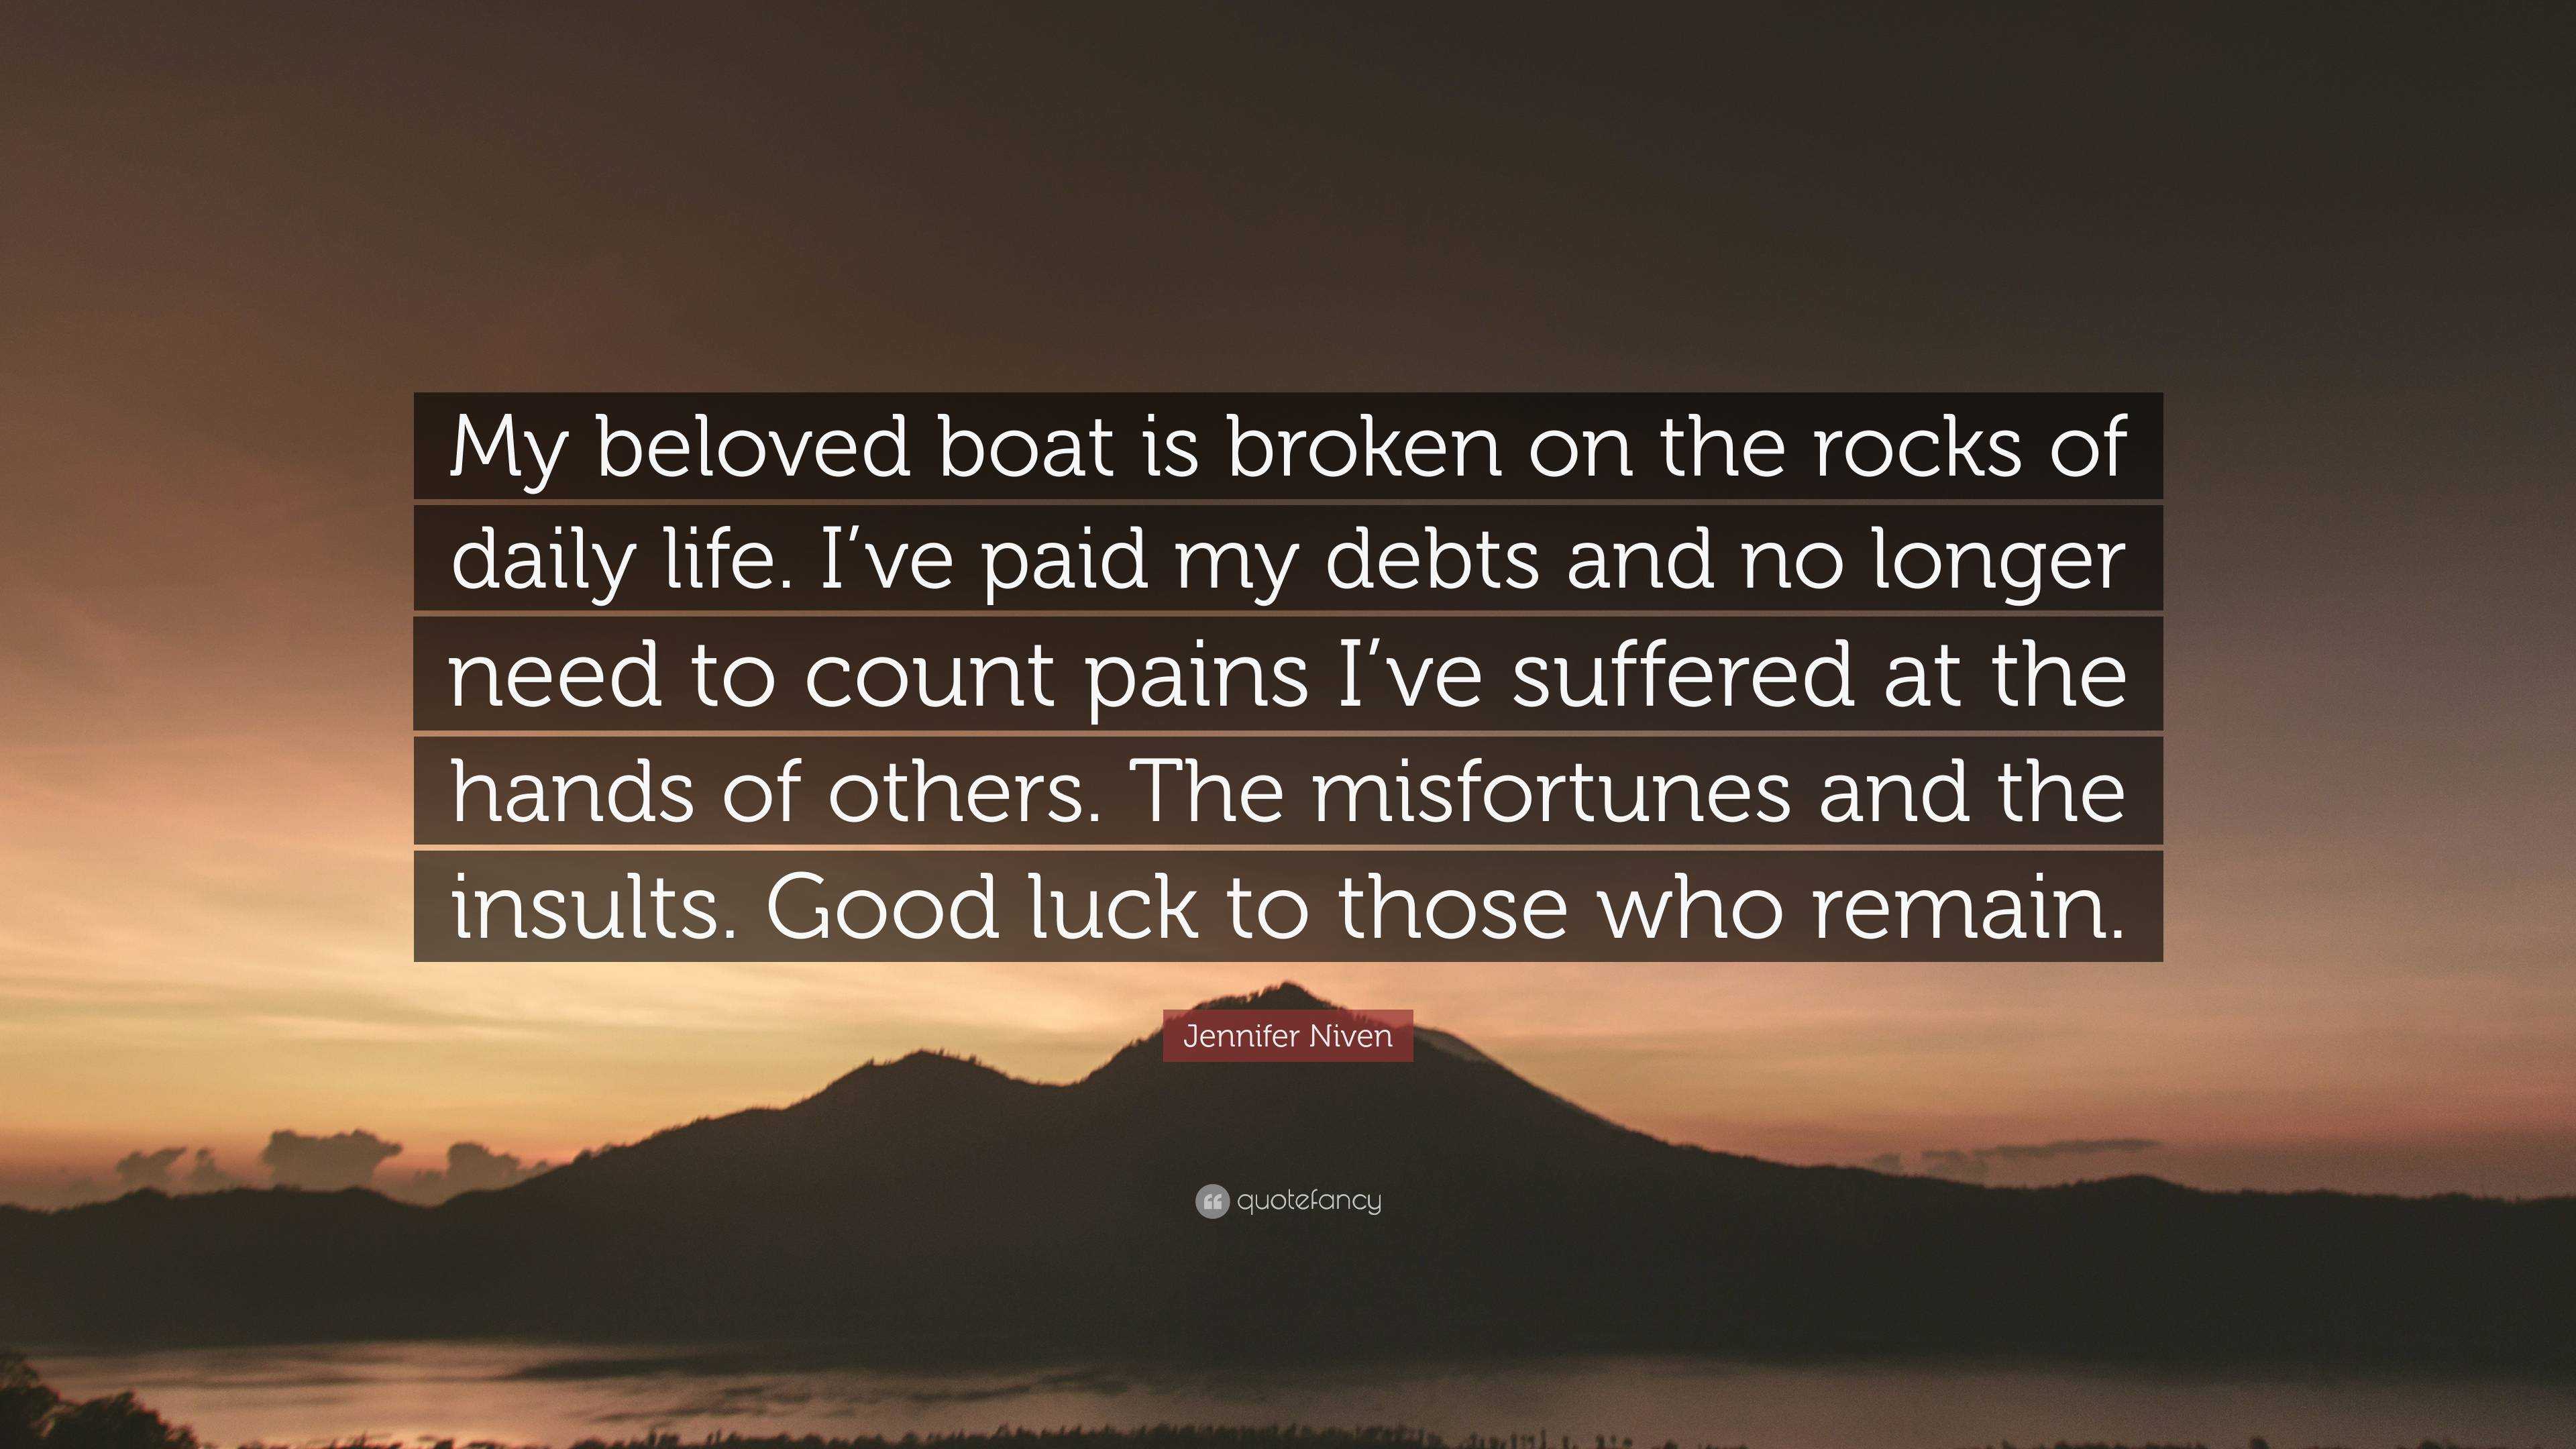 Jennifer Niven Quote: “My beloved boat is broken on the rocks of daily ...